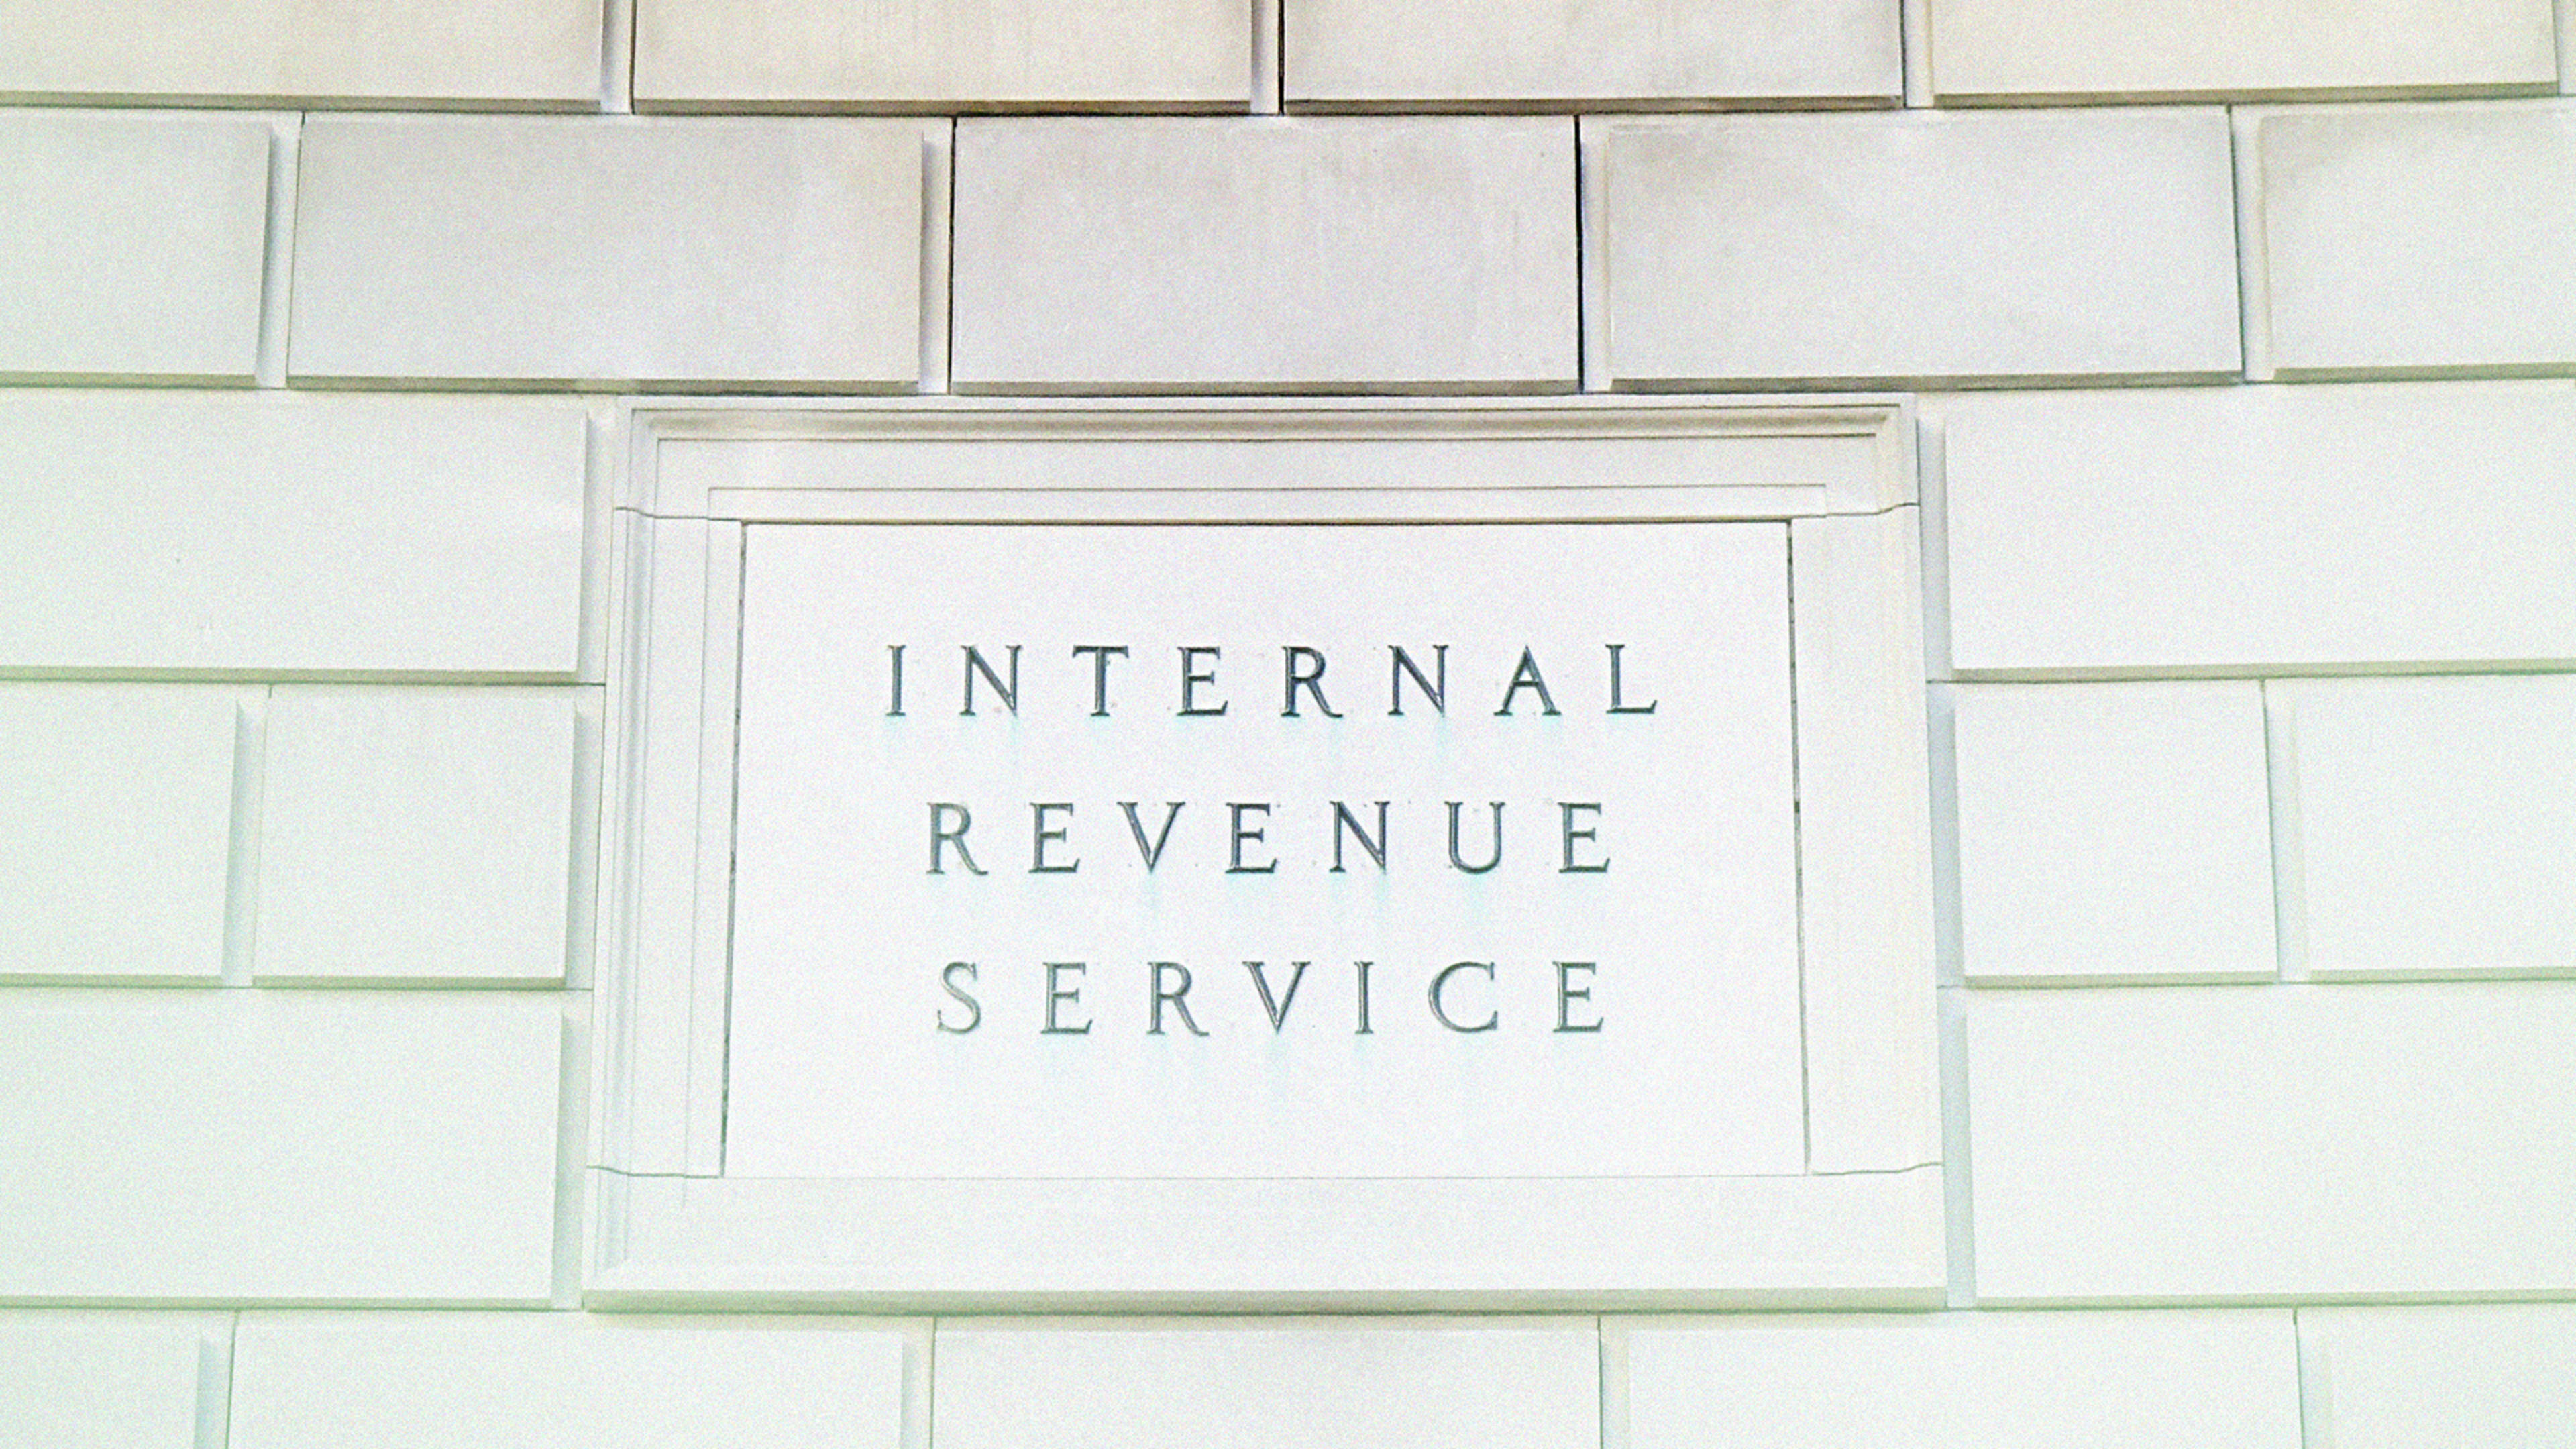 Coinbase is handing over tax information on 13,000 accounts after legal fight with IRS